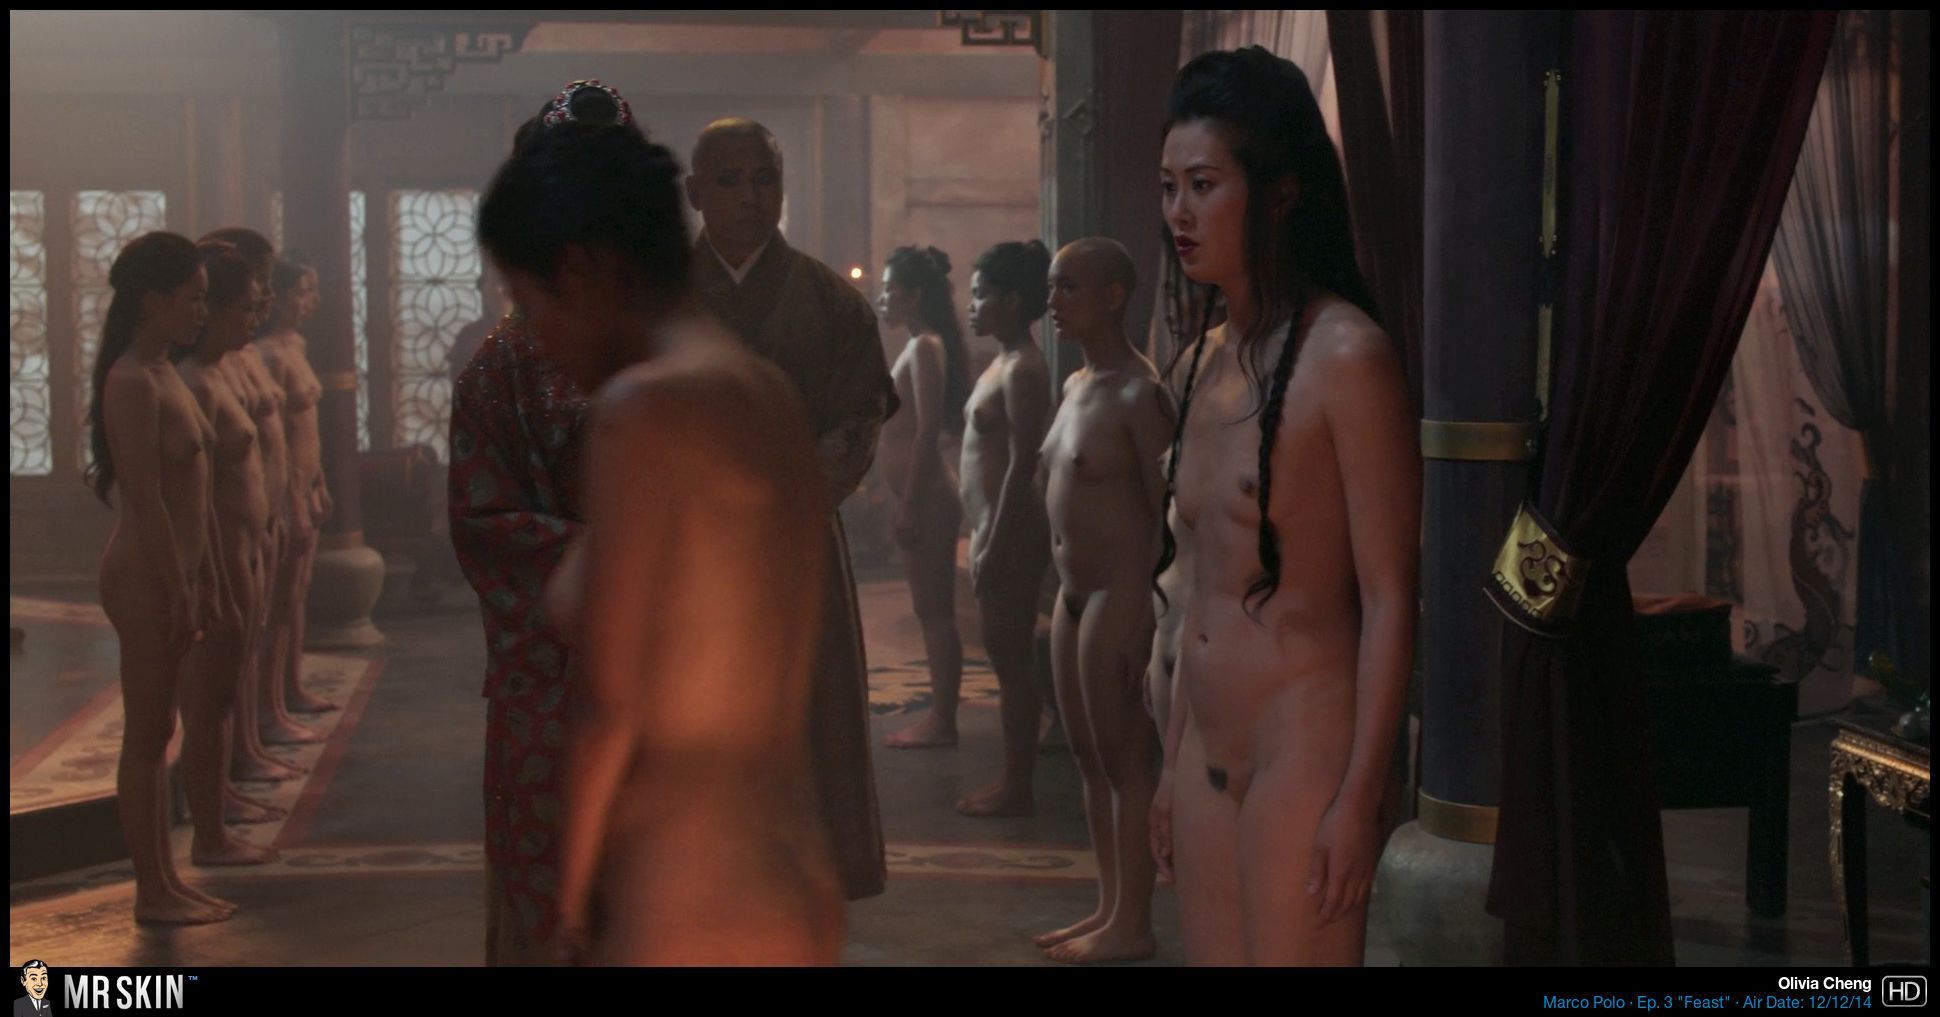 Tv Nudity Report Marco Polo The Affair And Kingdom 